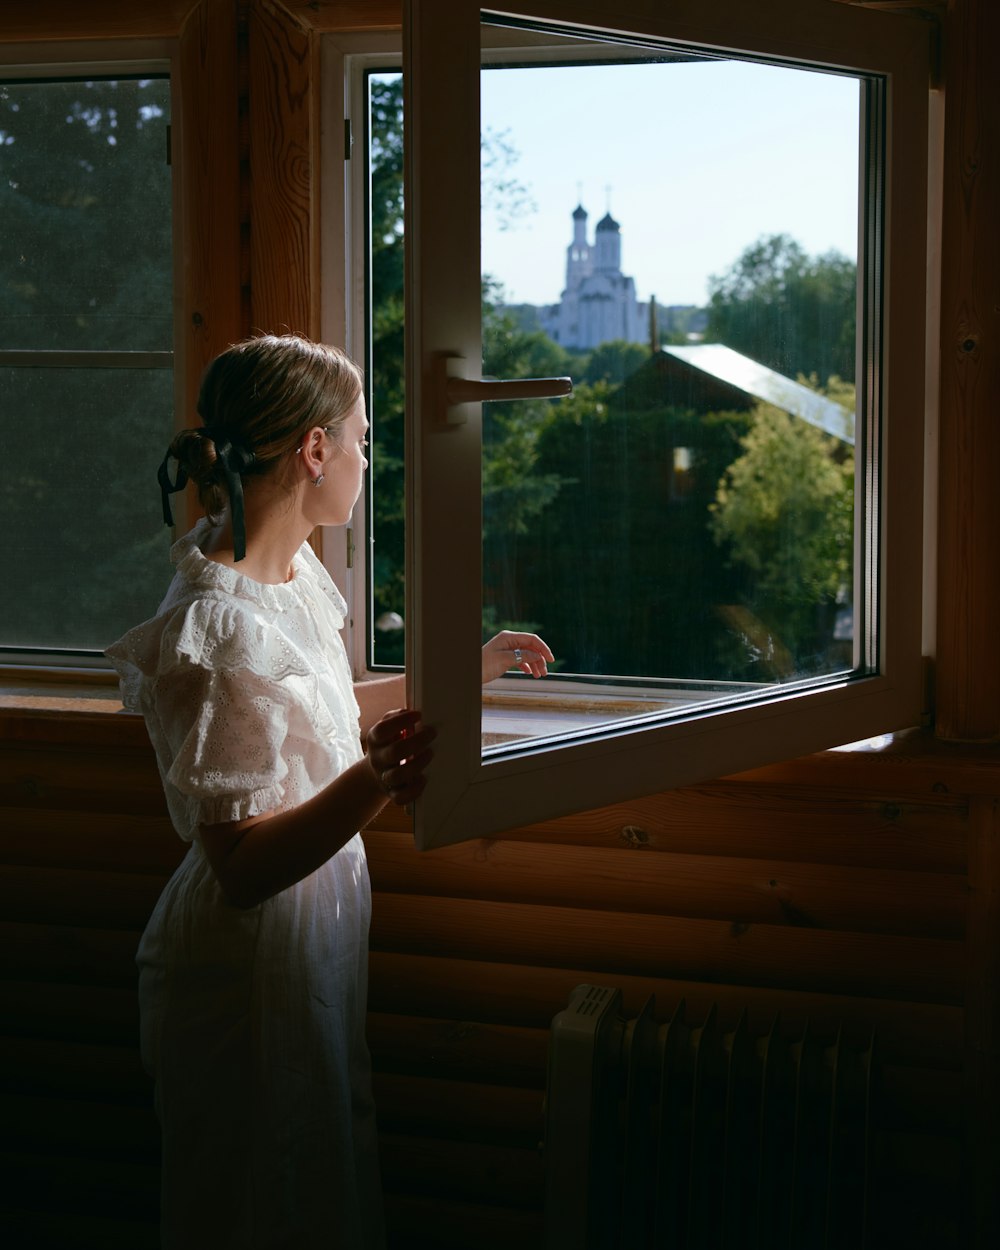 a young girl looking out a window at the city